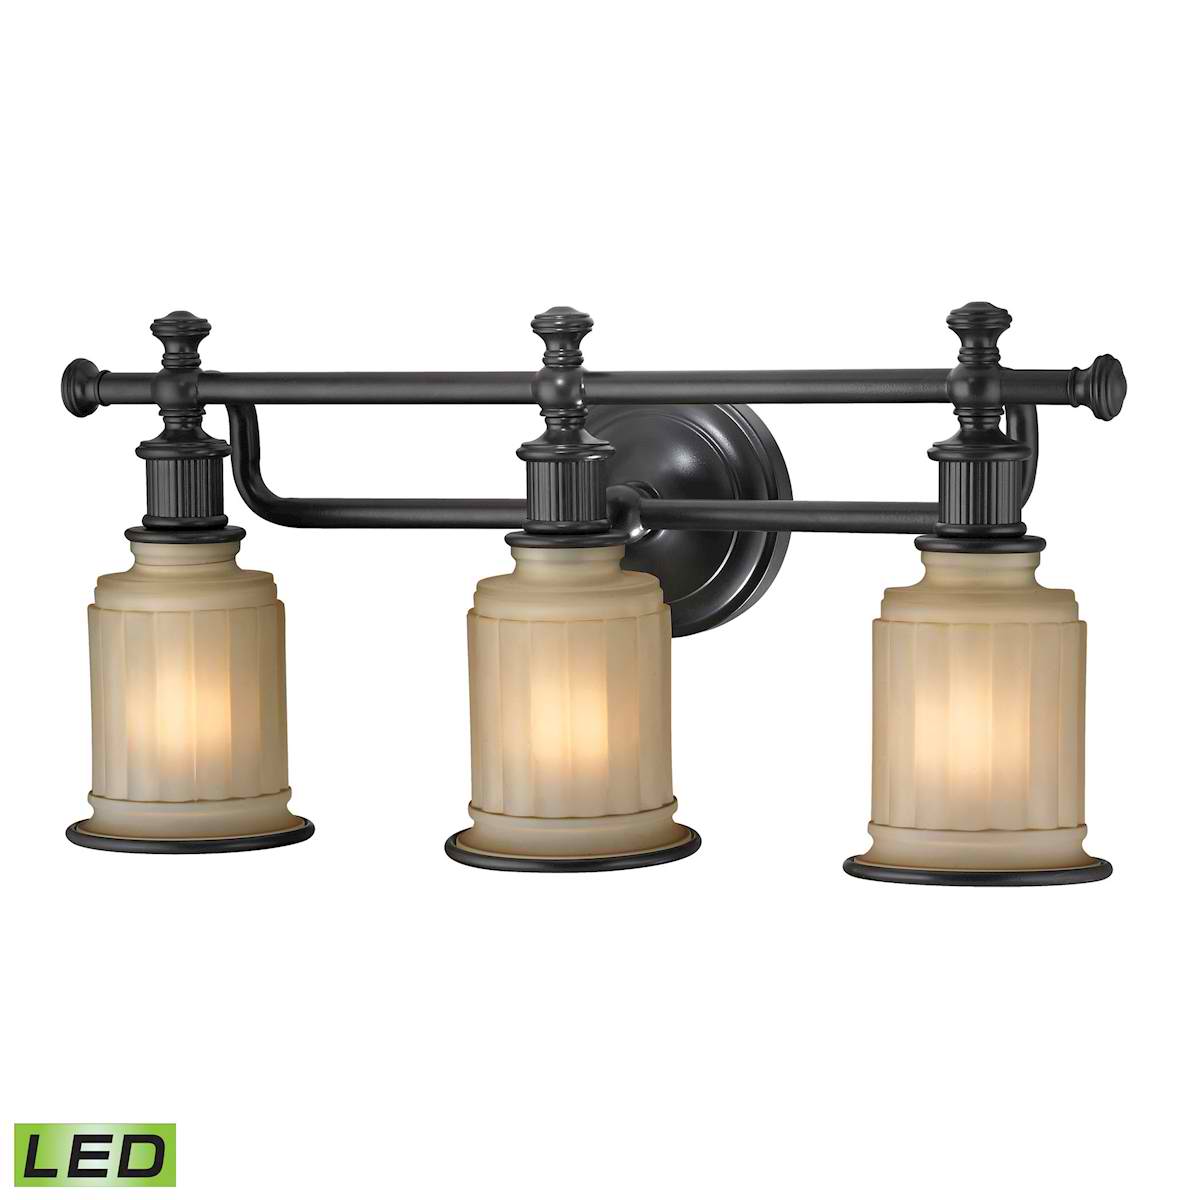 Acadia Collection 3 Light Bath in Oil Rubbed Bronze - LED, 800 Lumens (2400 Lumens Total) with Full